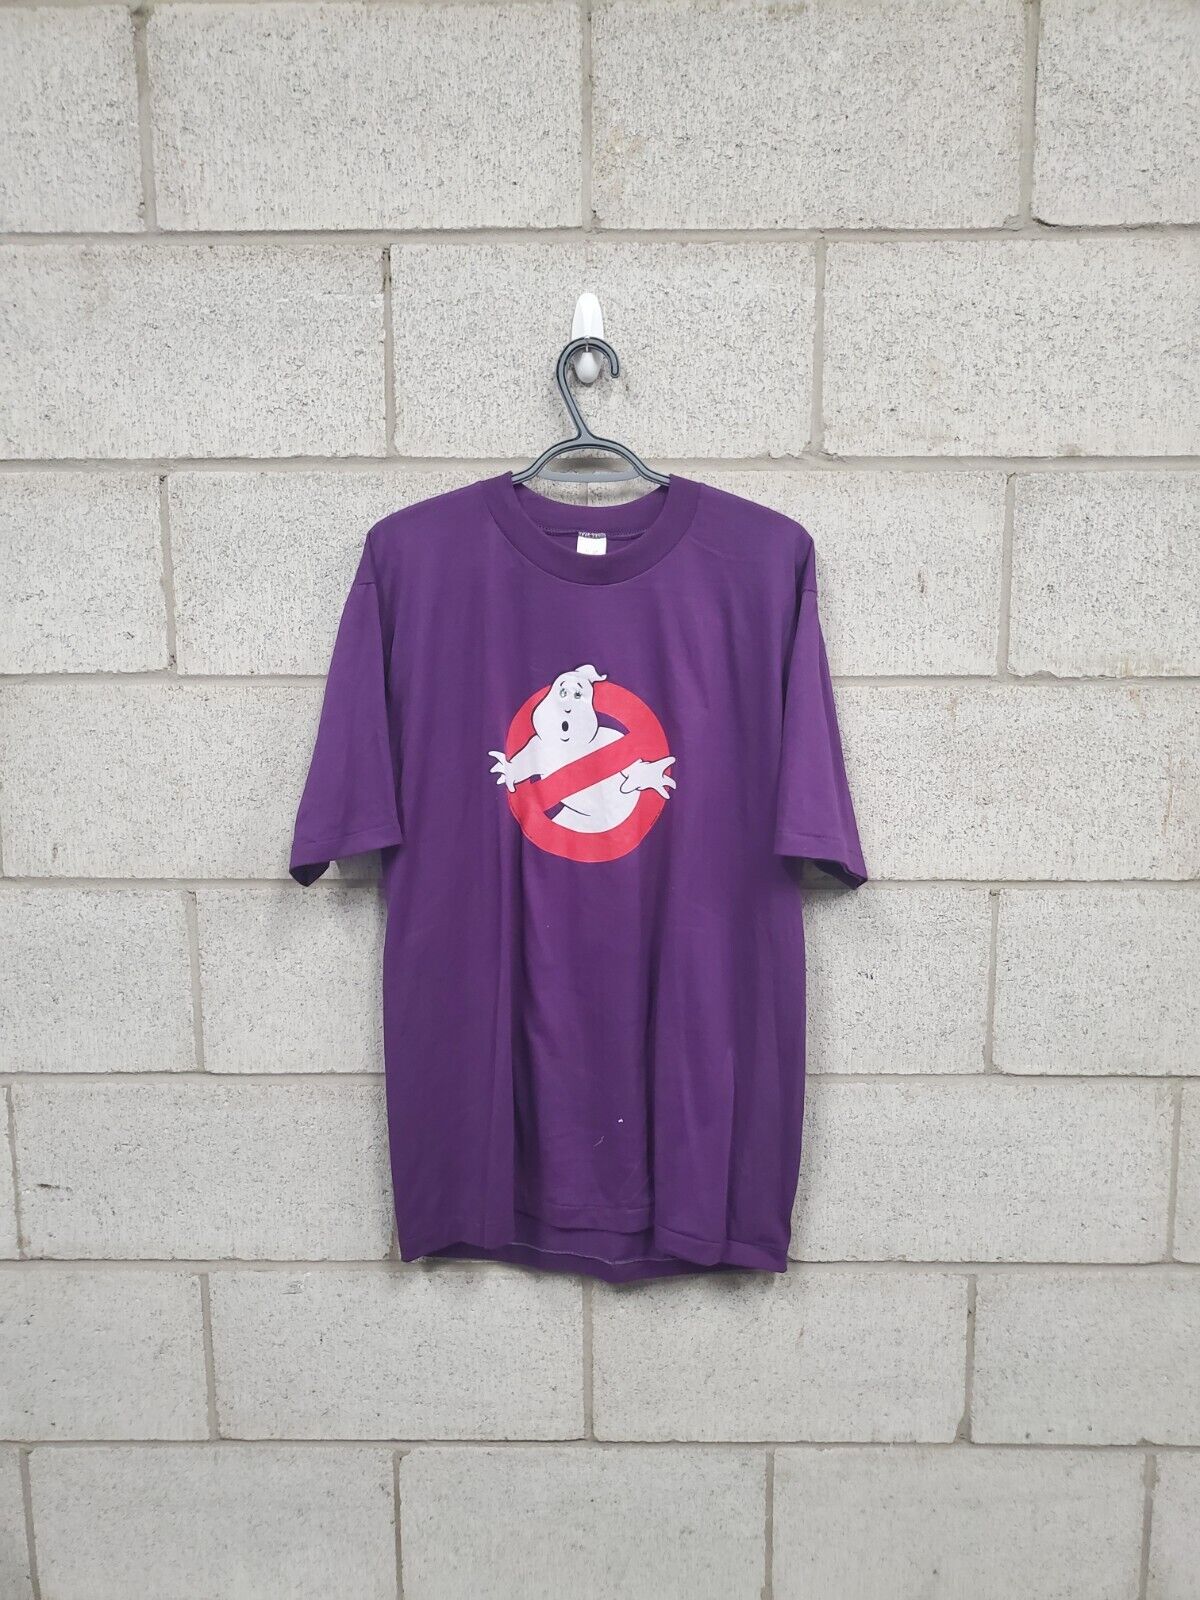 Mens 1984 Ghostbusters T-Shirt Size XL